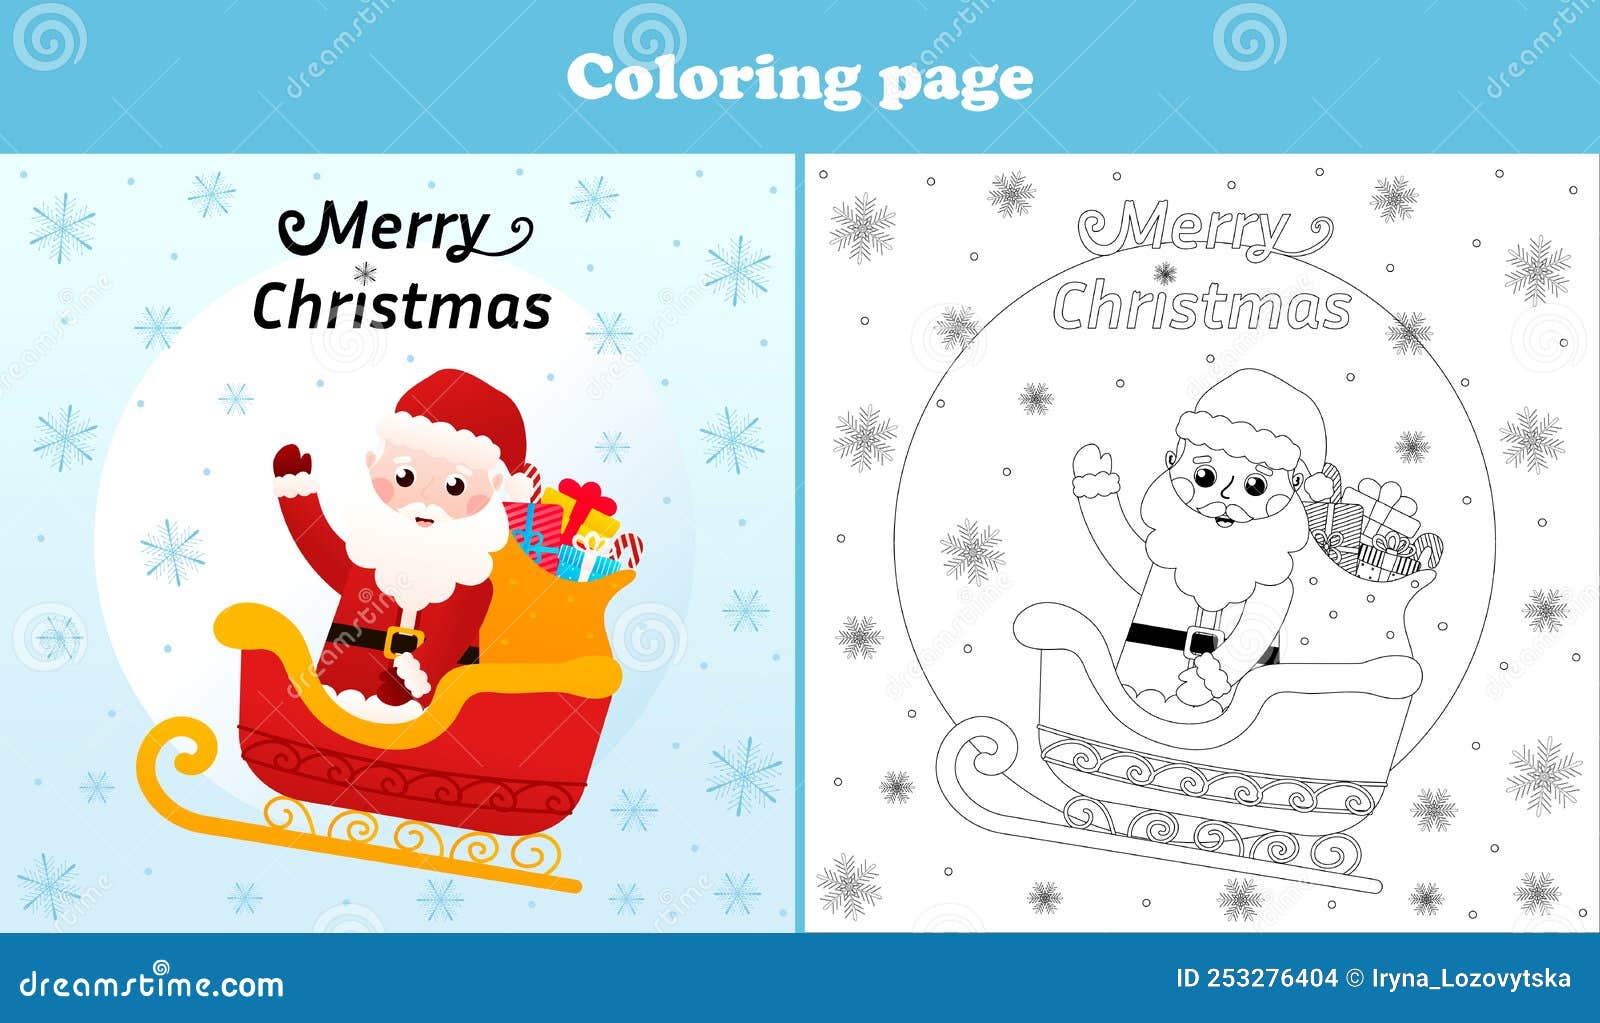 Santa claus on sleigh full of gifts coloring page for kids printable worksheet for children activity book stock vector